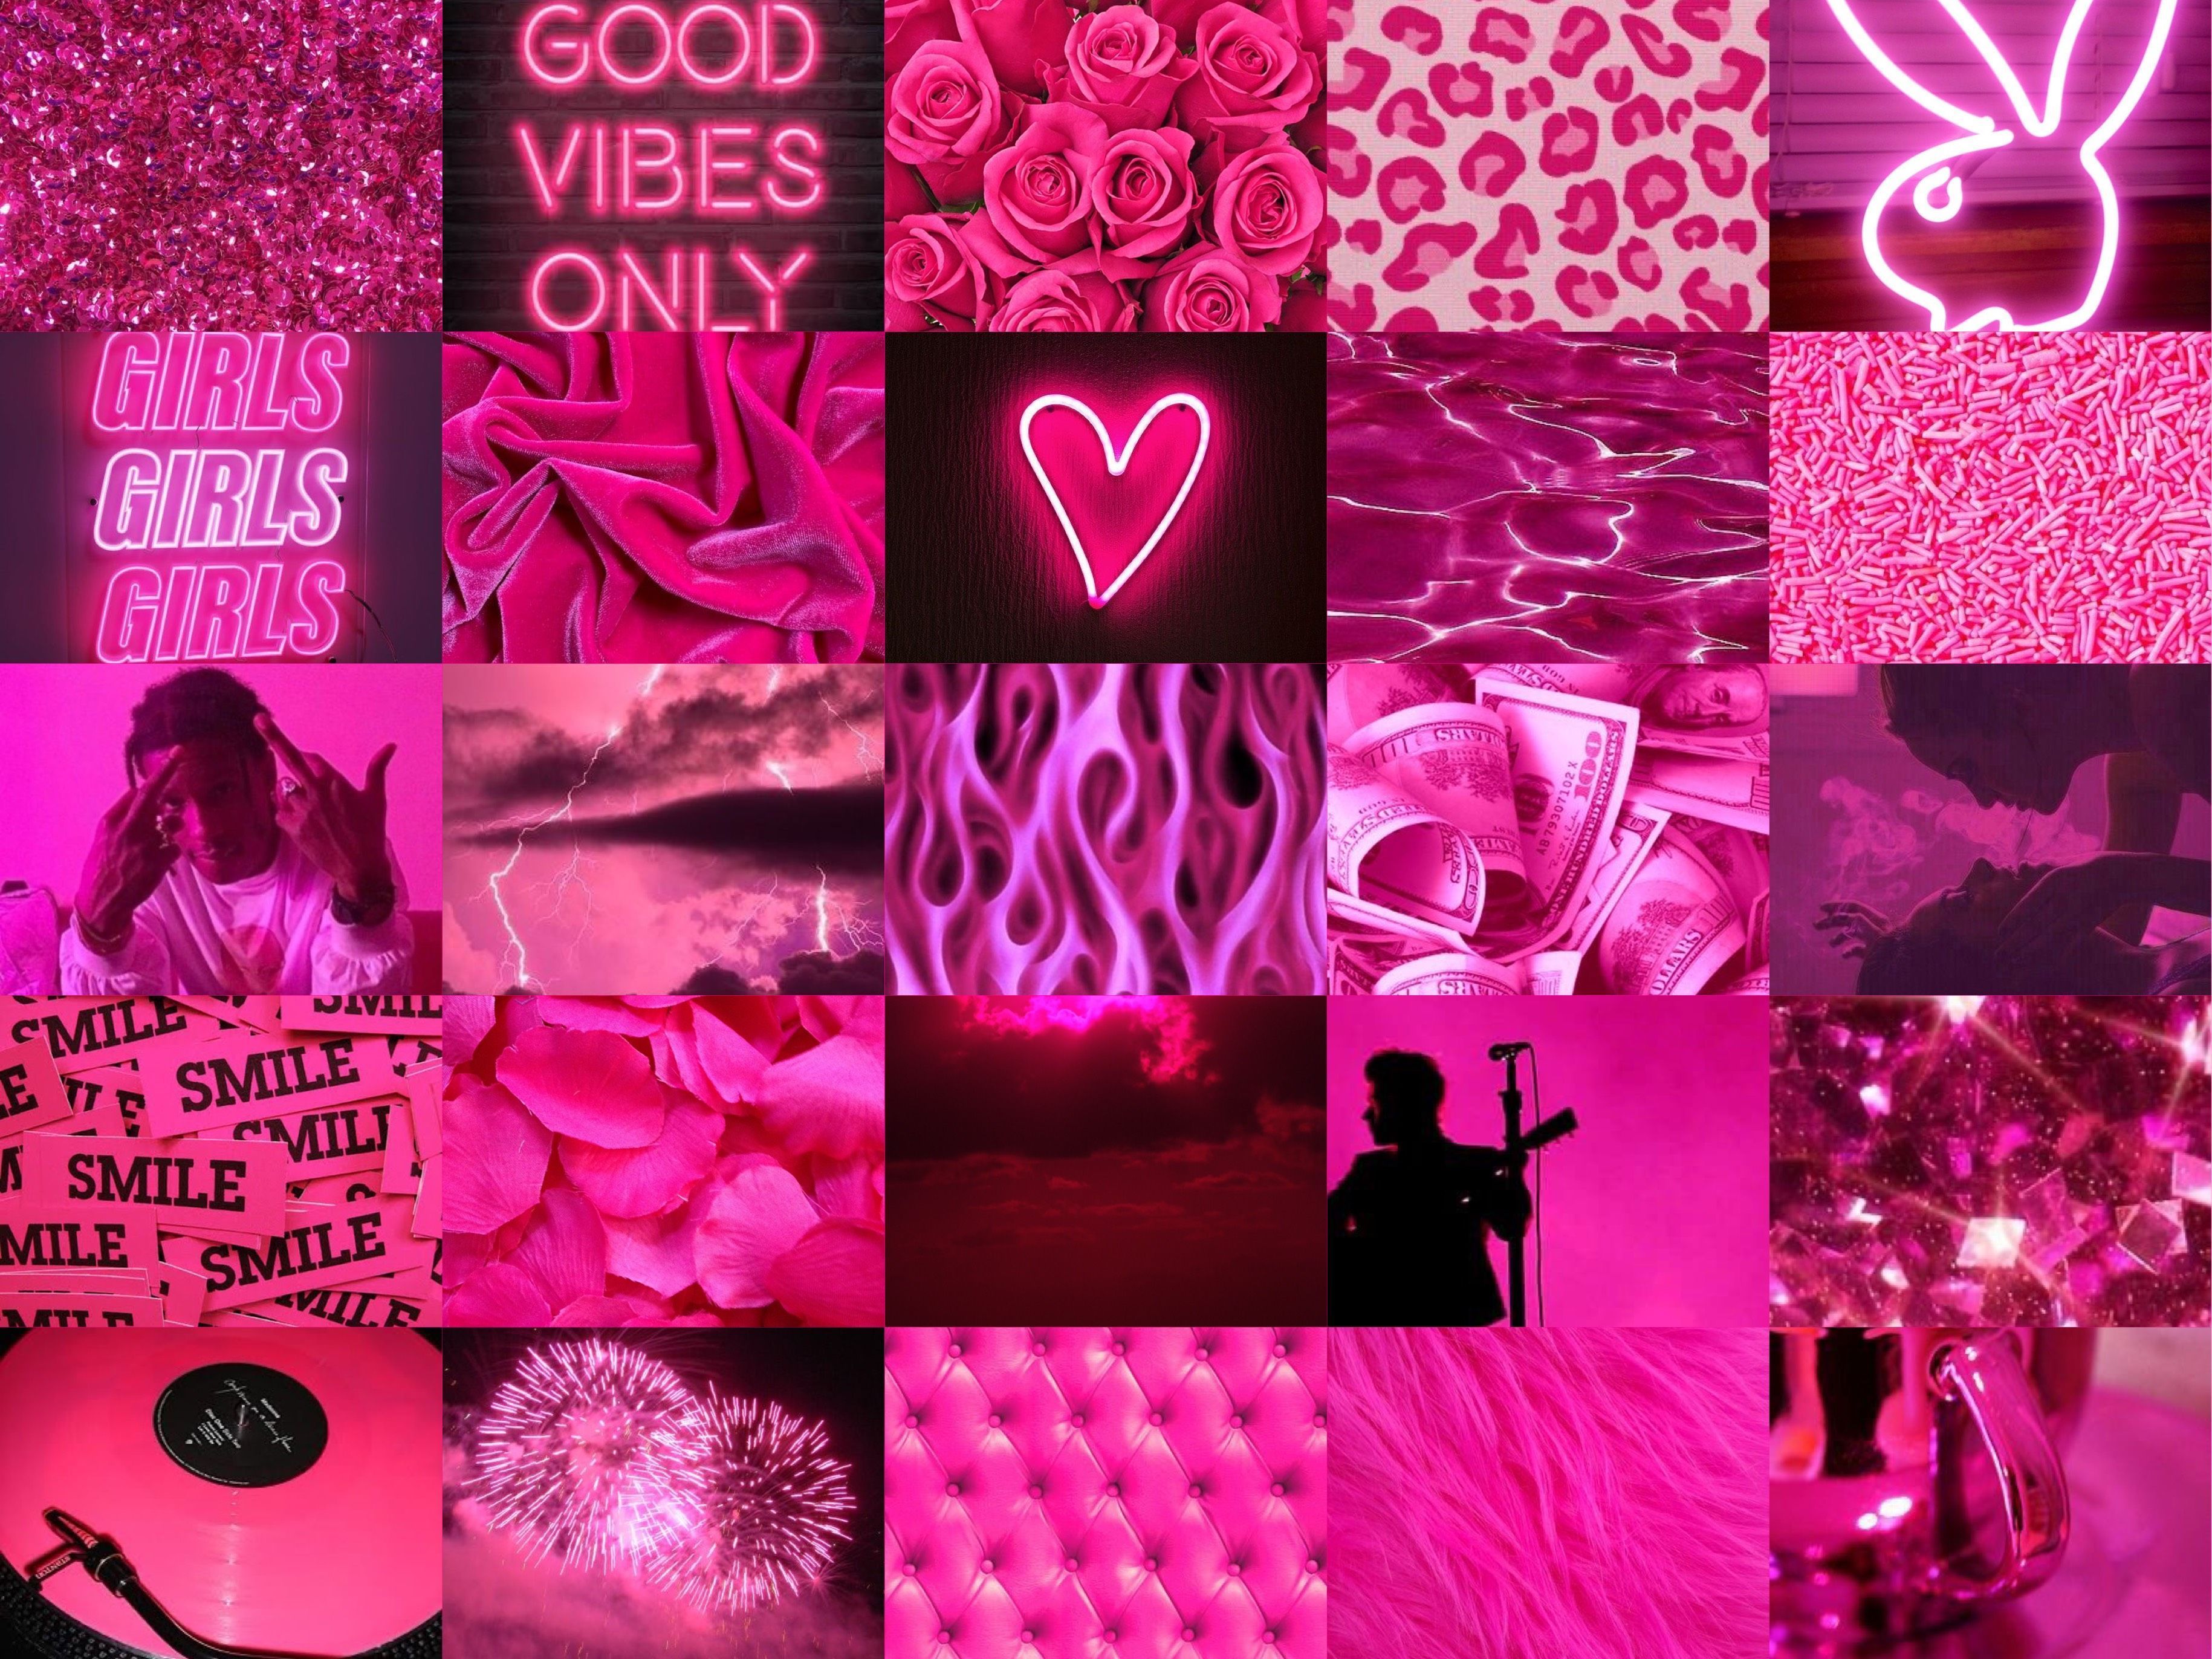 Aesthetic collage of pink photos - Hot pink, pink collage